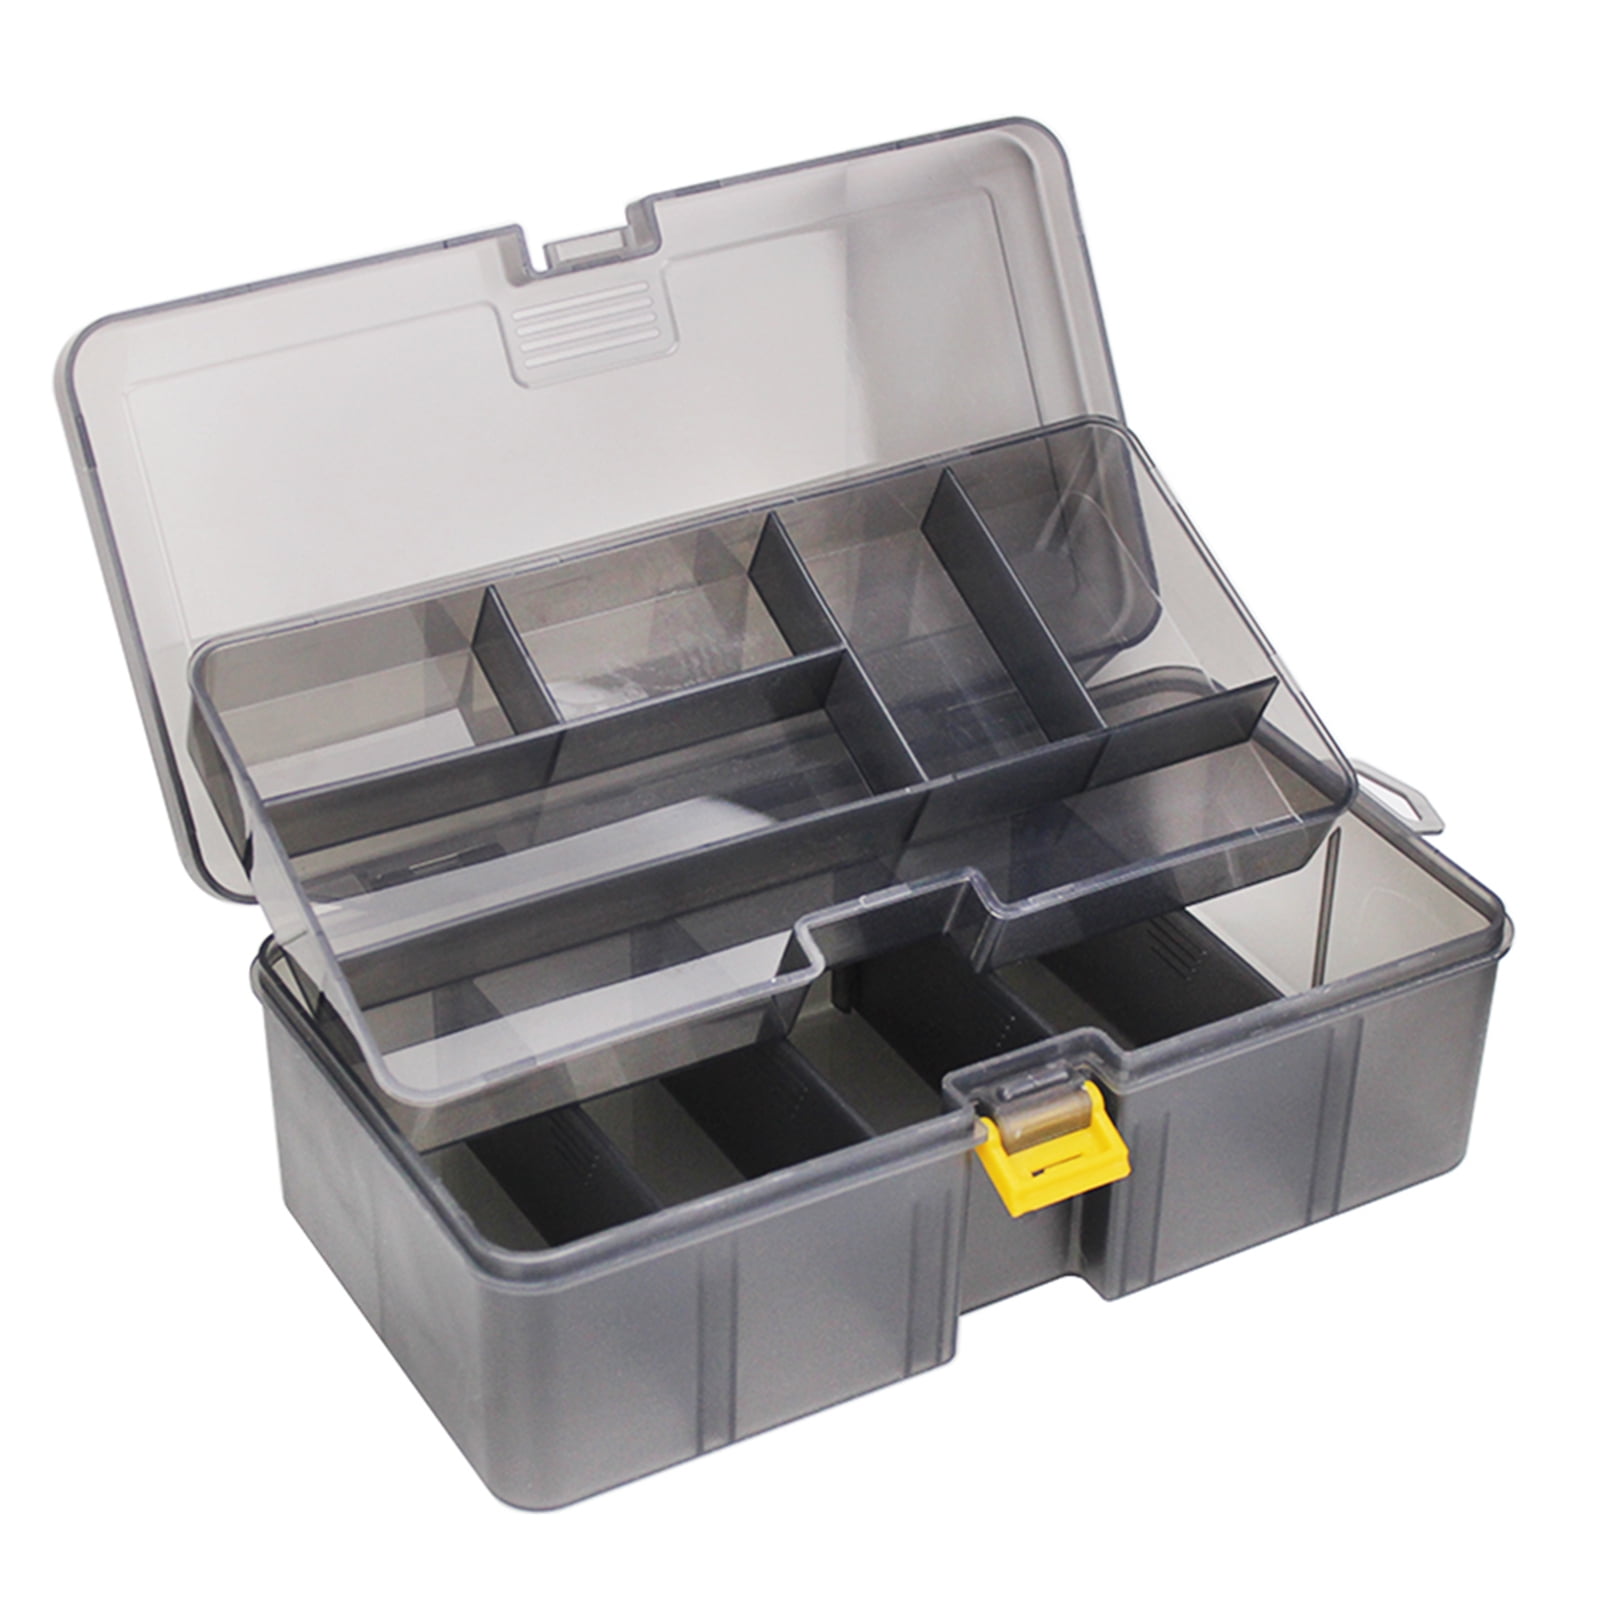 Details about   Waterproof Fishing Lure Bait Tackle Case Storage Box with 2 Layer 30 Compartment 